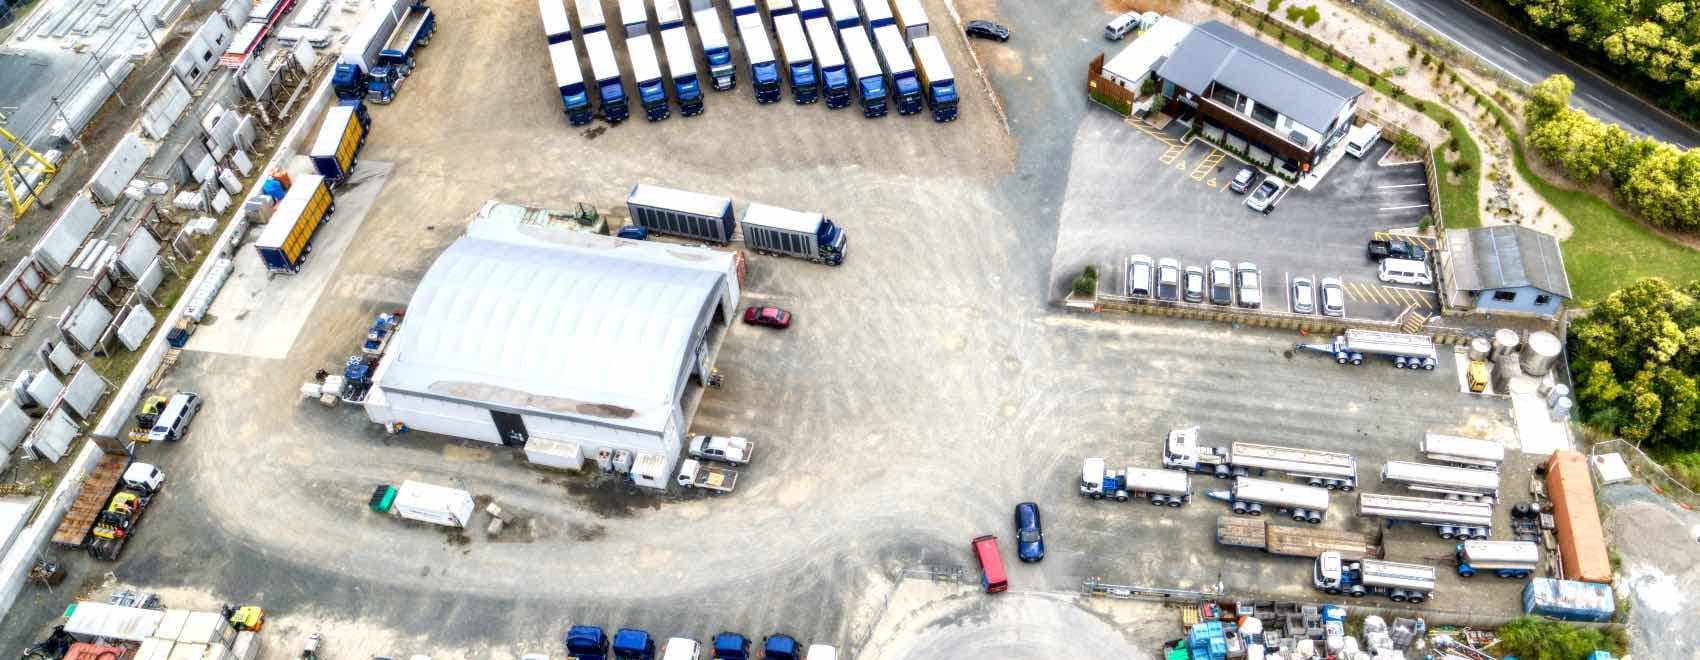 A birds eye view of a shipping yard with numerous semi trucks parked neatly.